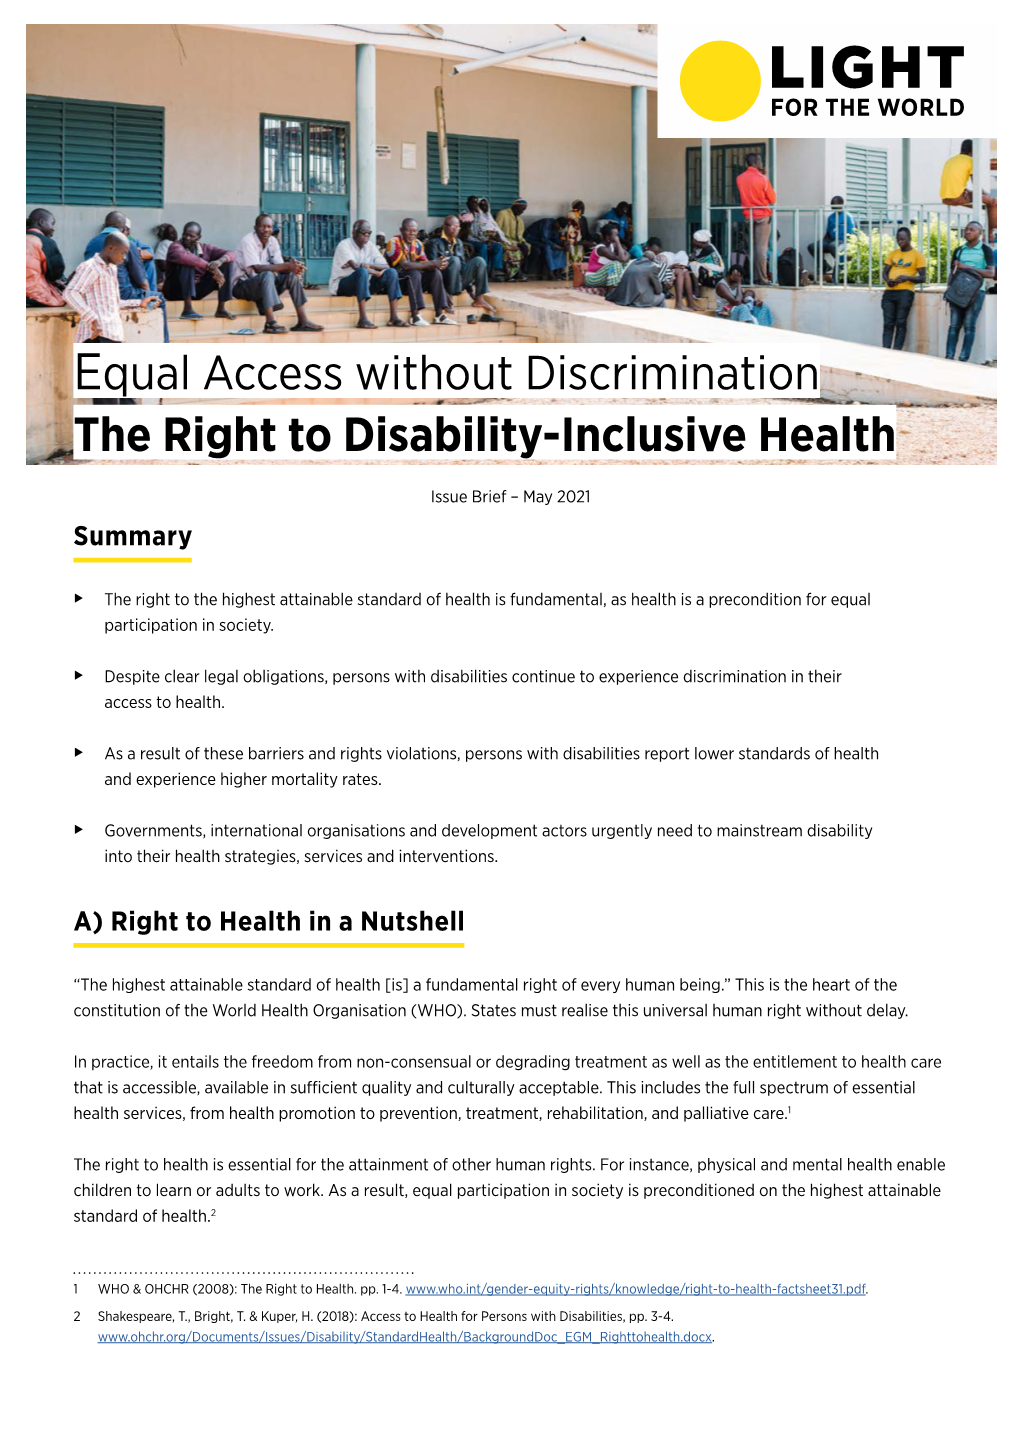 Issue Brief on the Right to Disability-Inclusive Health